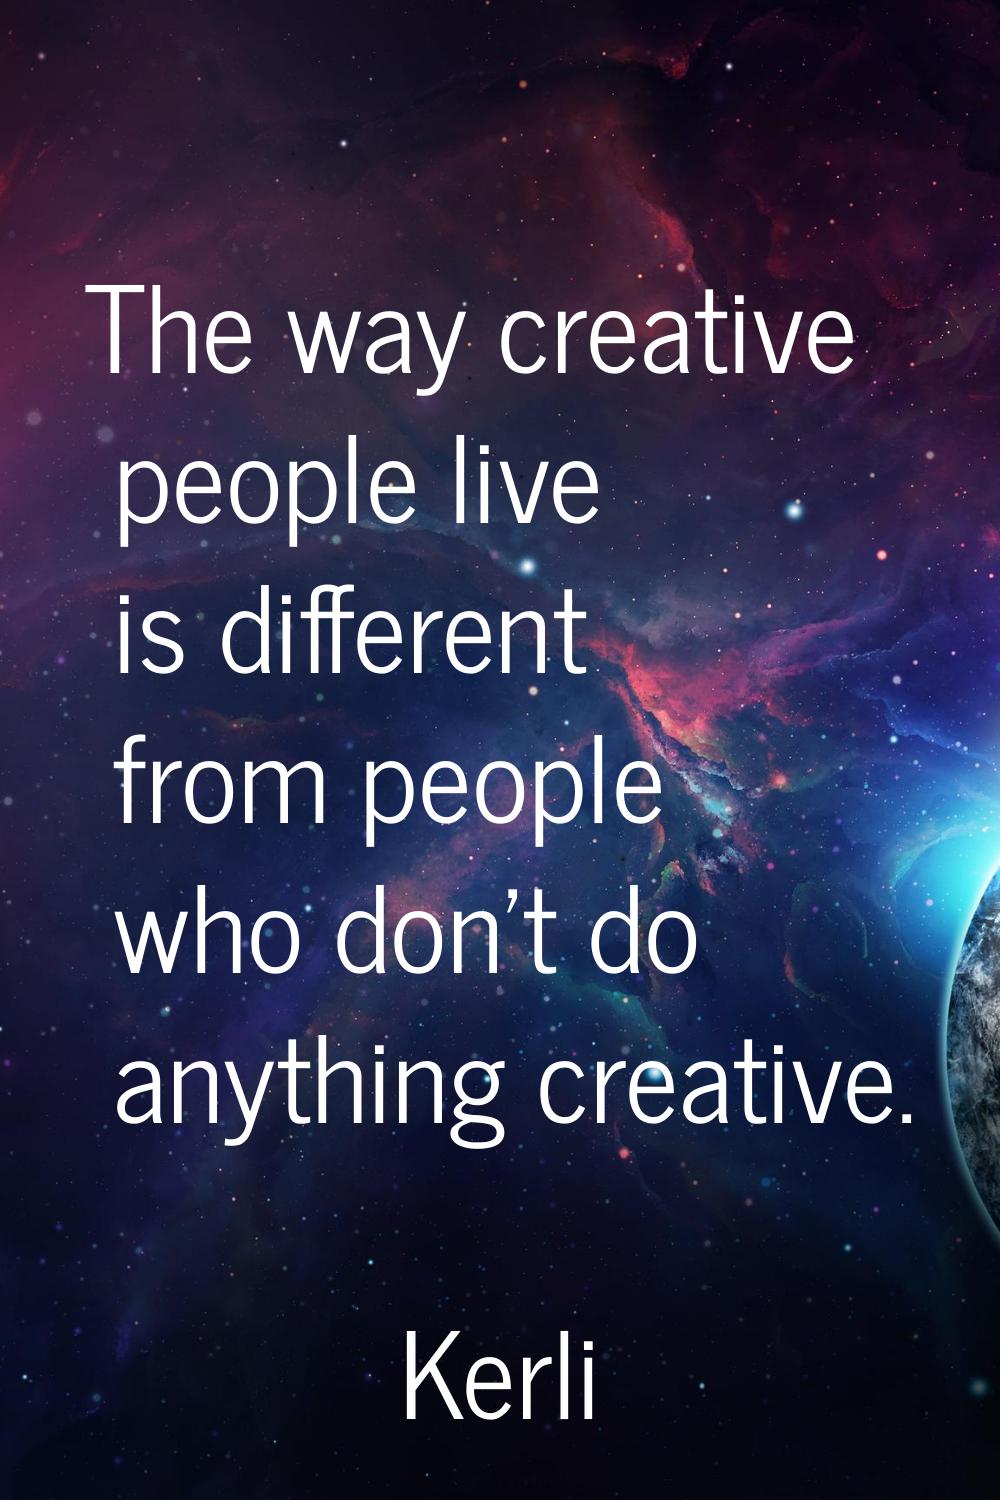 The way creative people live is different from people who don't do anything creative.